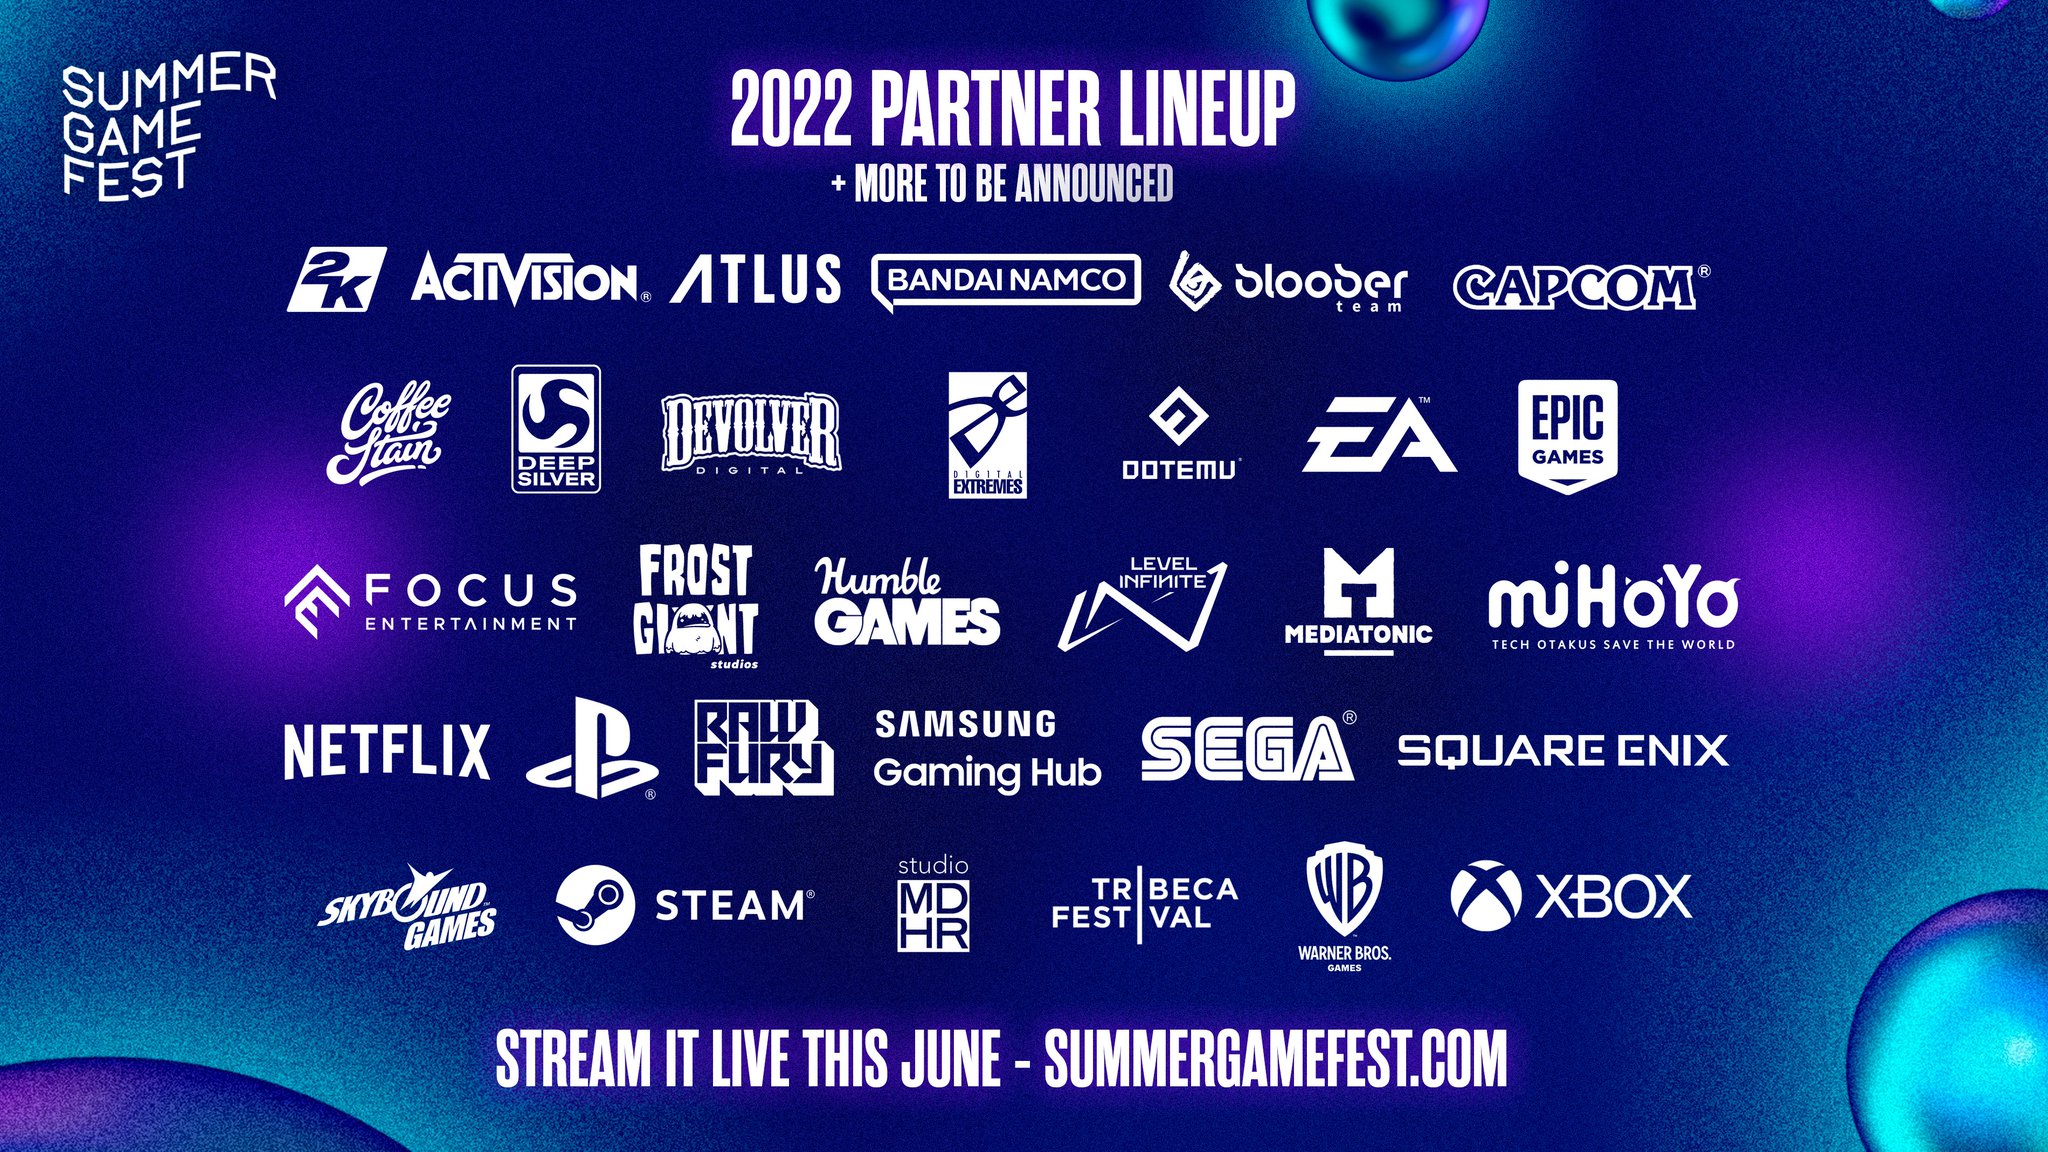 Summer Game Fest on Twitter "Here's a look at more than 30 partners